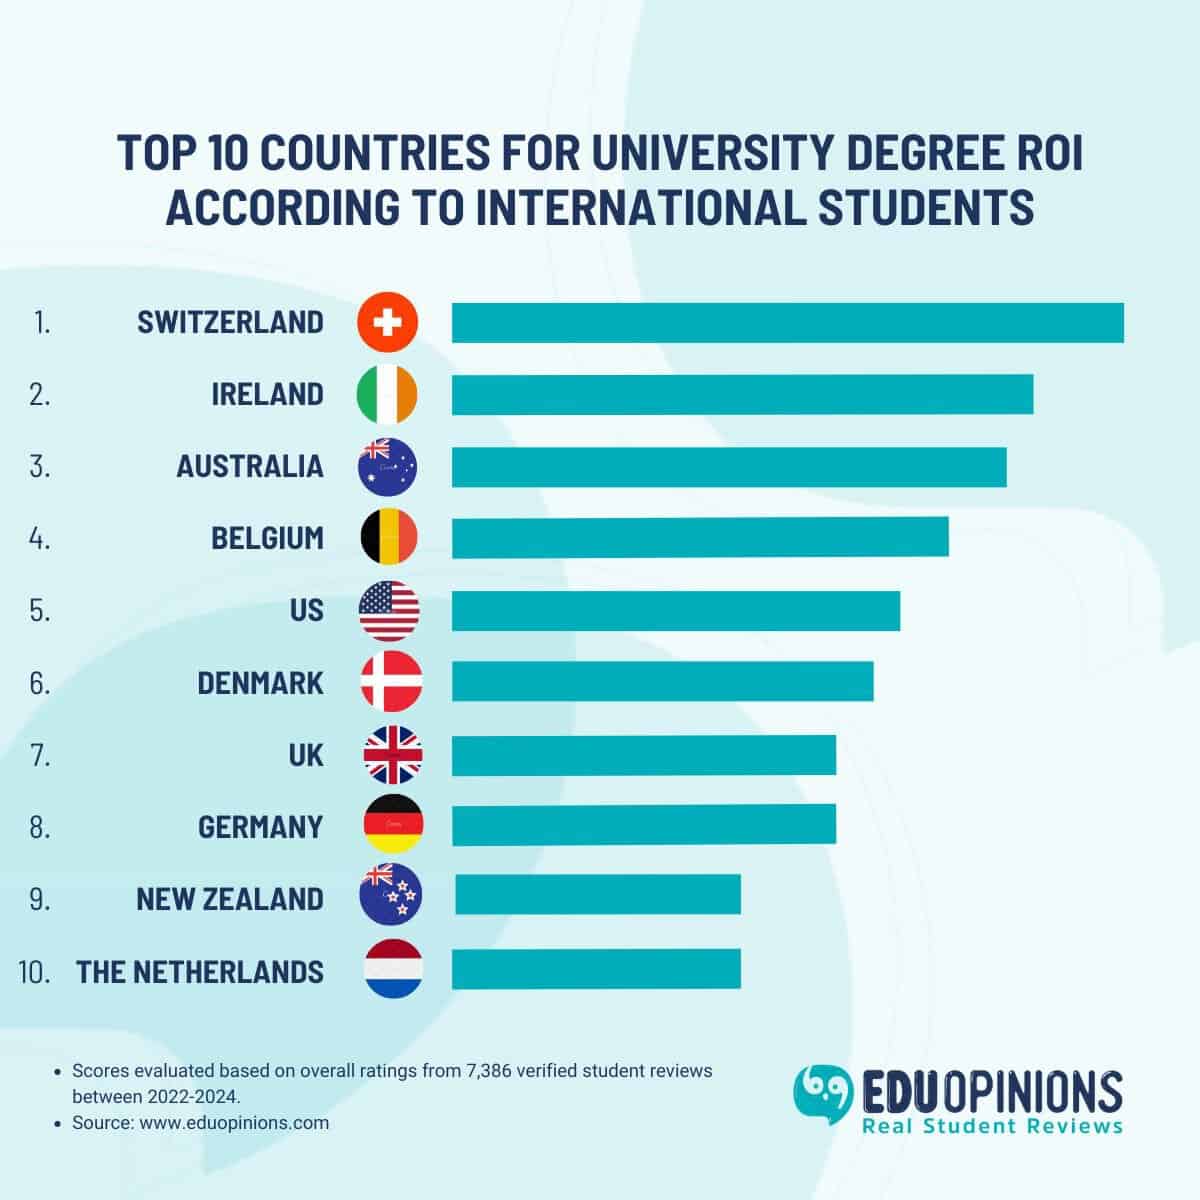 Top 10 Countries for University Degree ROI